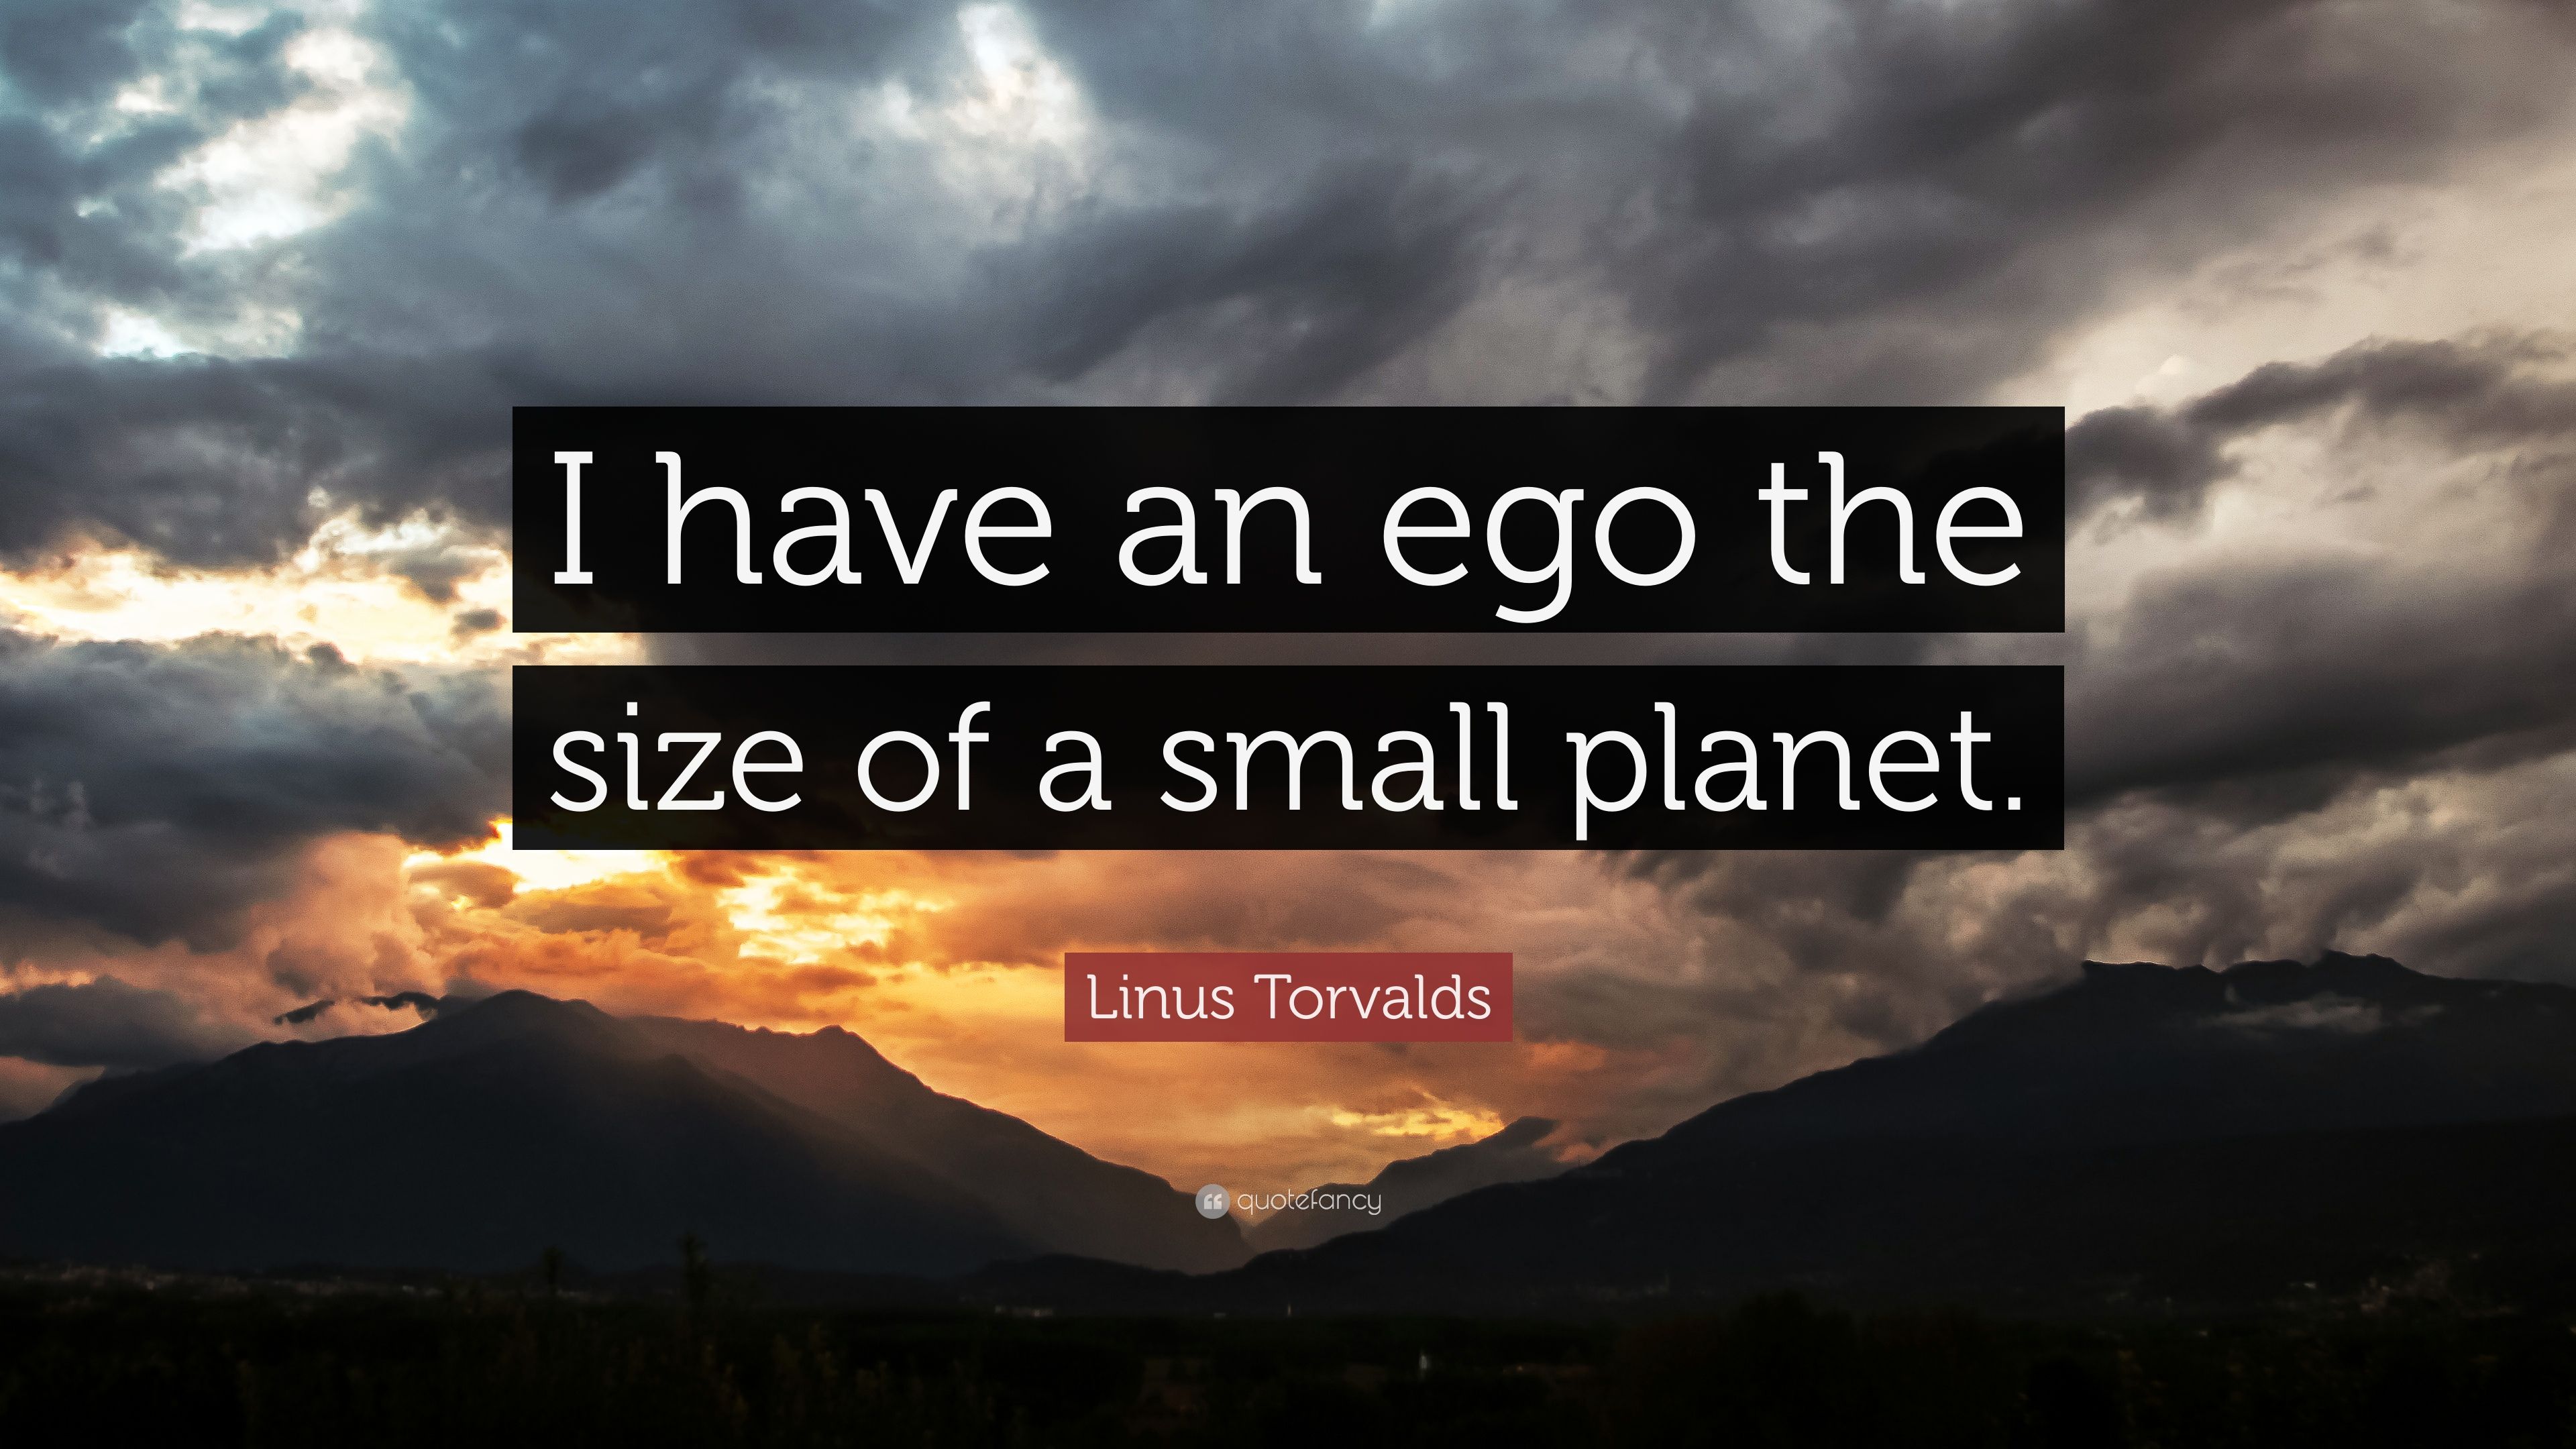 Linus Torvalds Quote: “I have an ego the size of a small planet